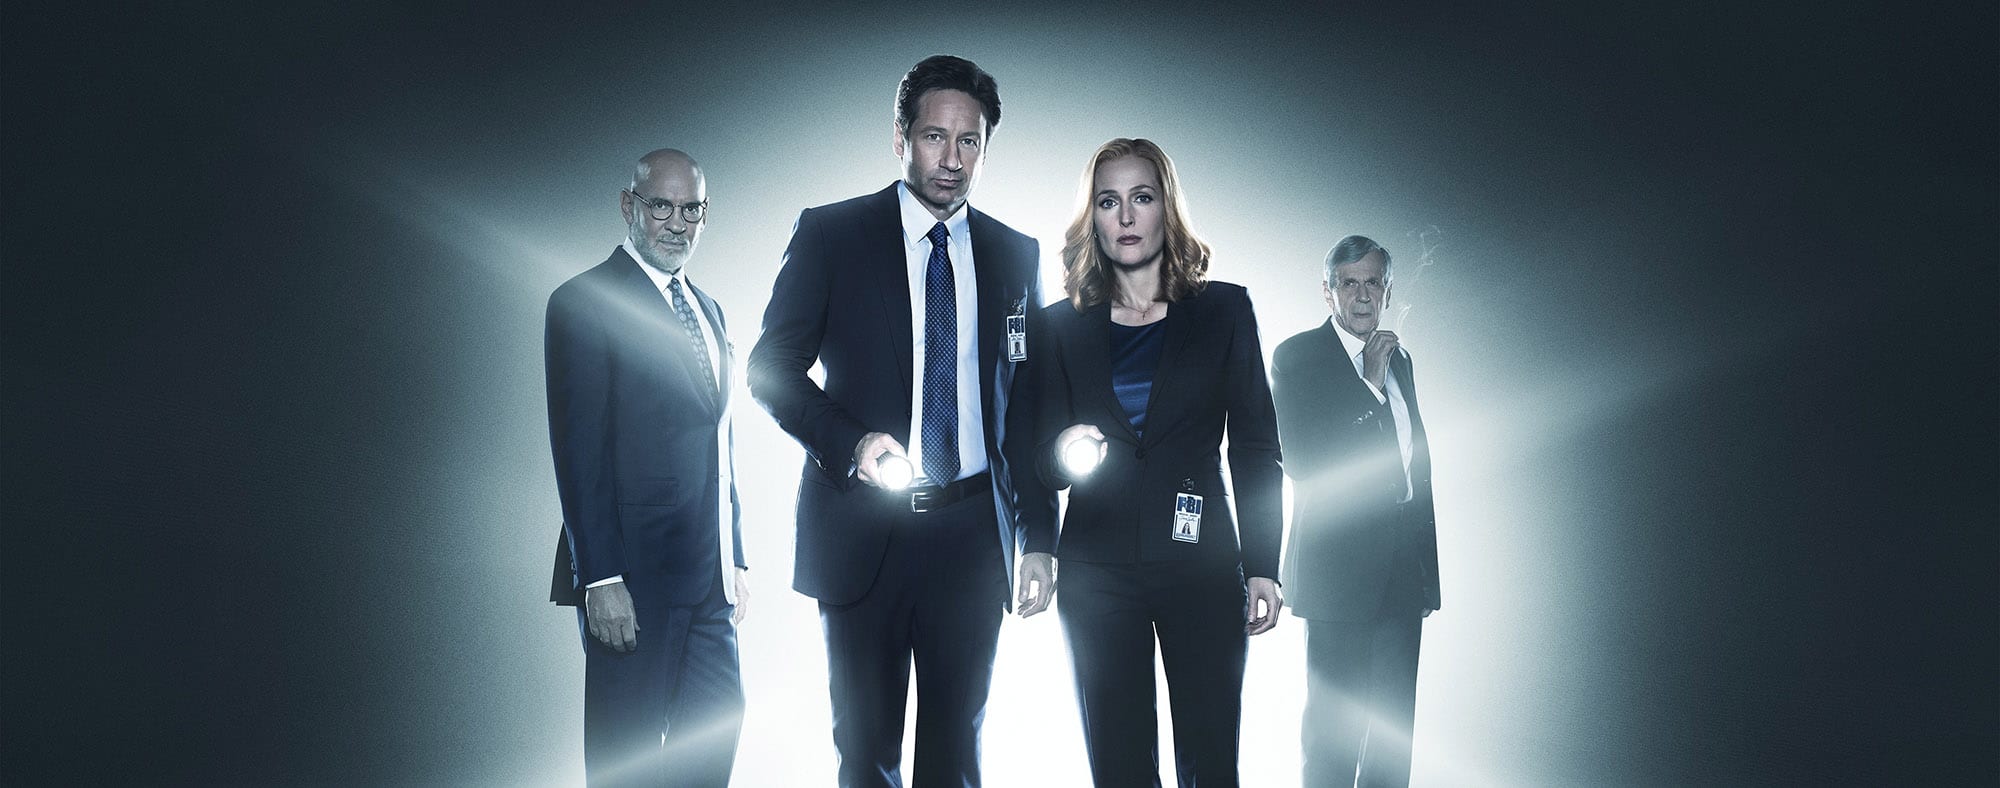 'The X-Files' is revered for episodes like "Home" that offer a self-contained hour of terror. Ranked for your nightmares, here are ten of our absolute faves.